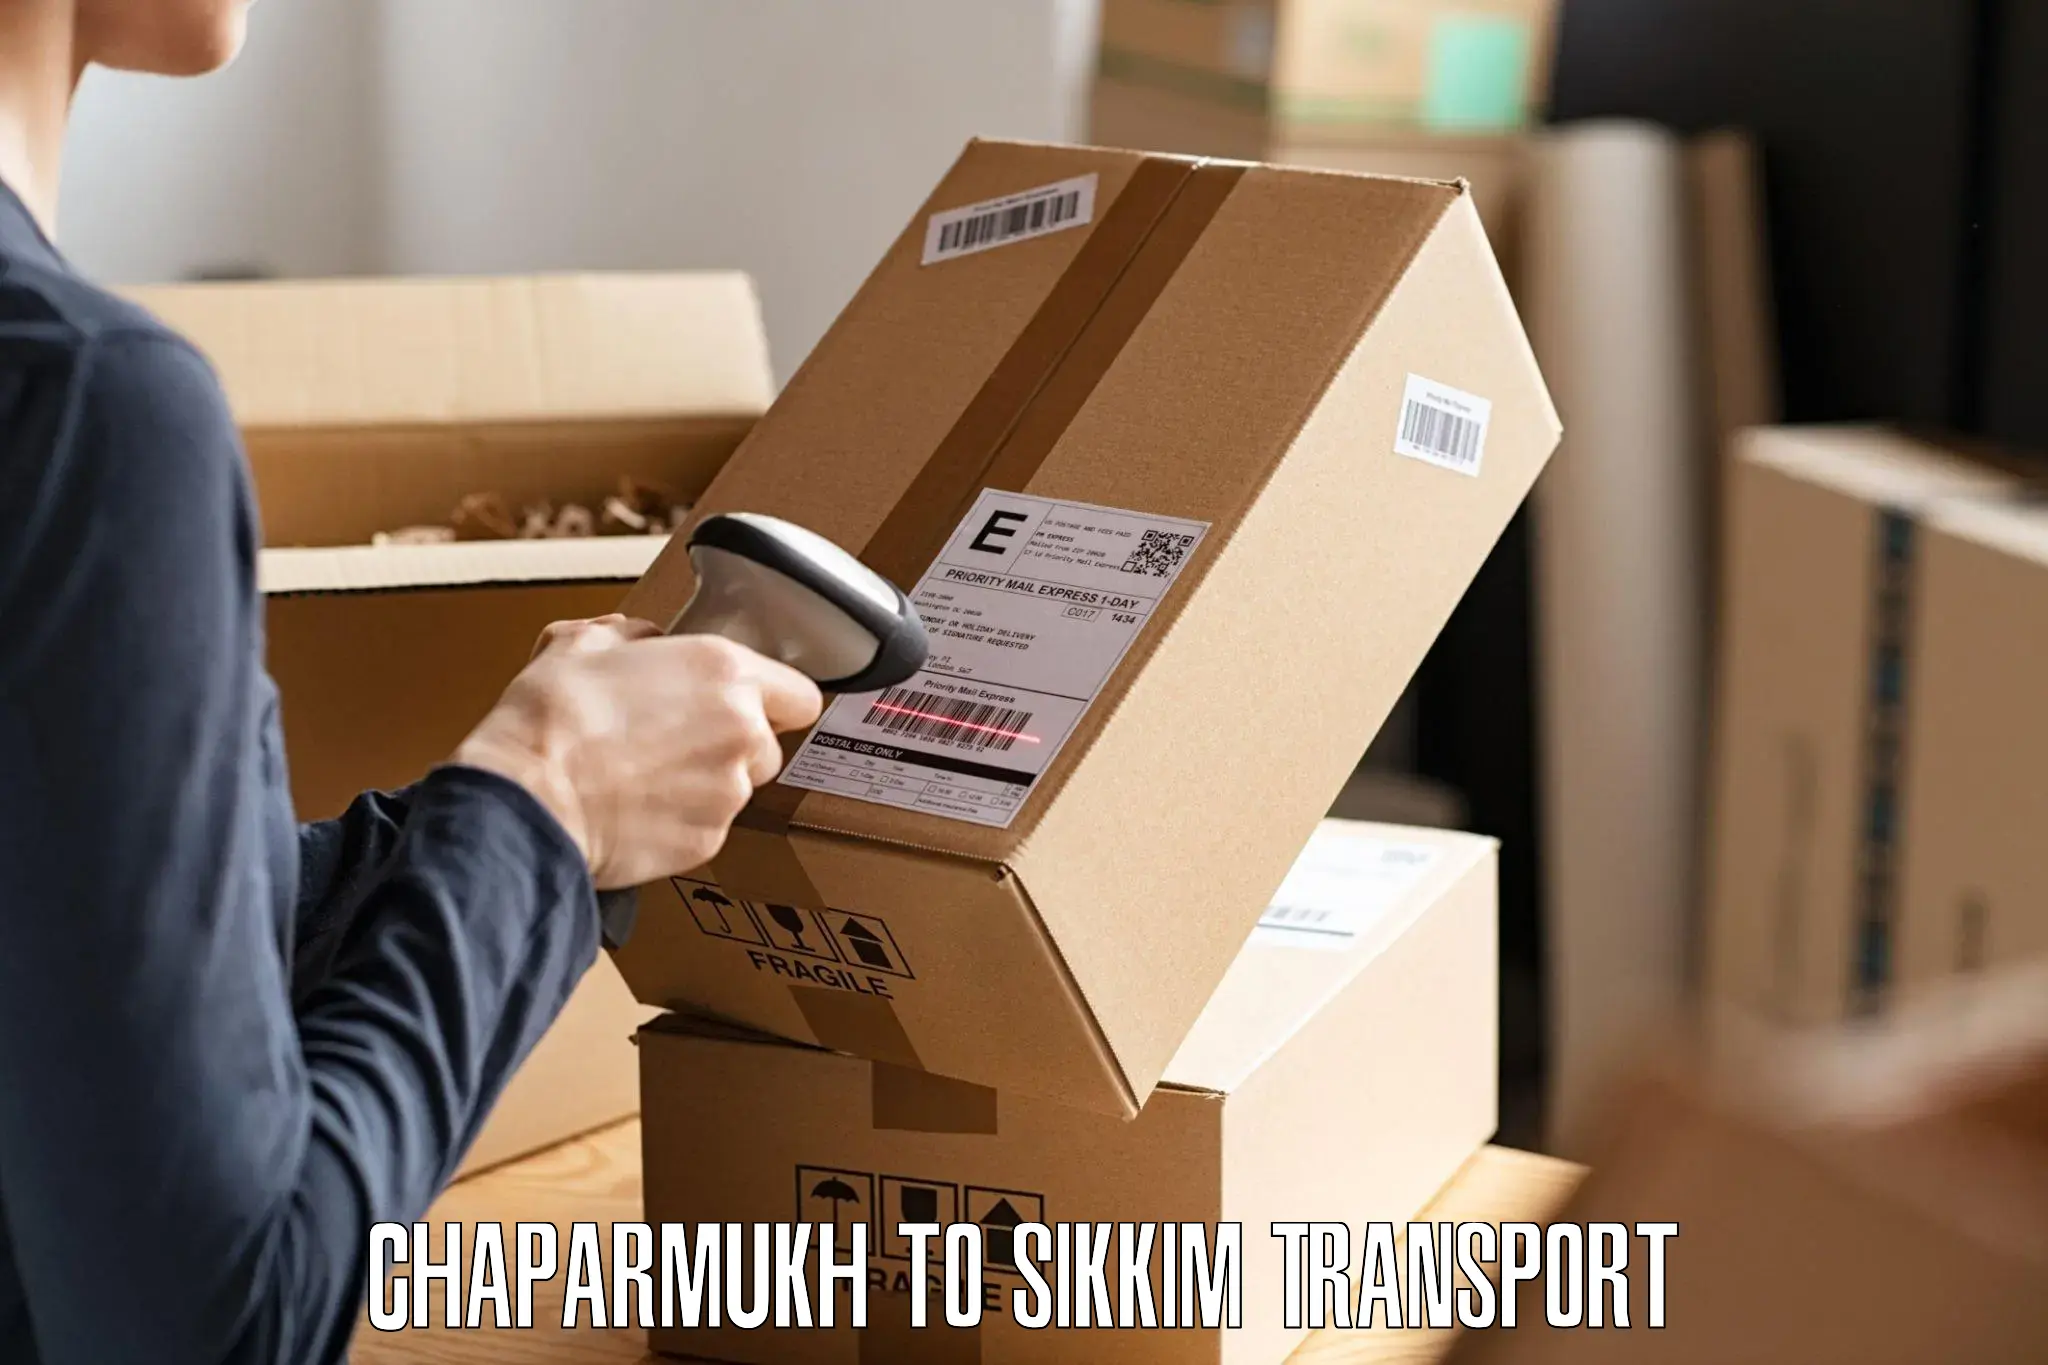 Pick up transport service Chaparmukh to South Sikkim